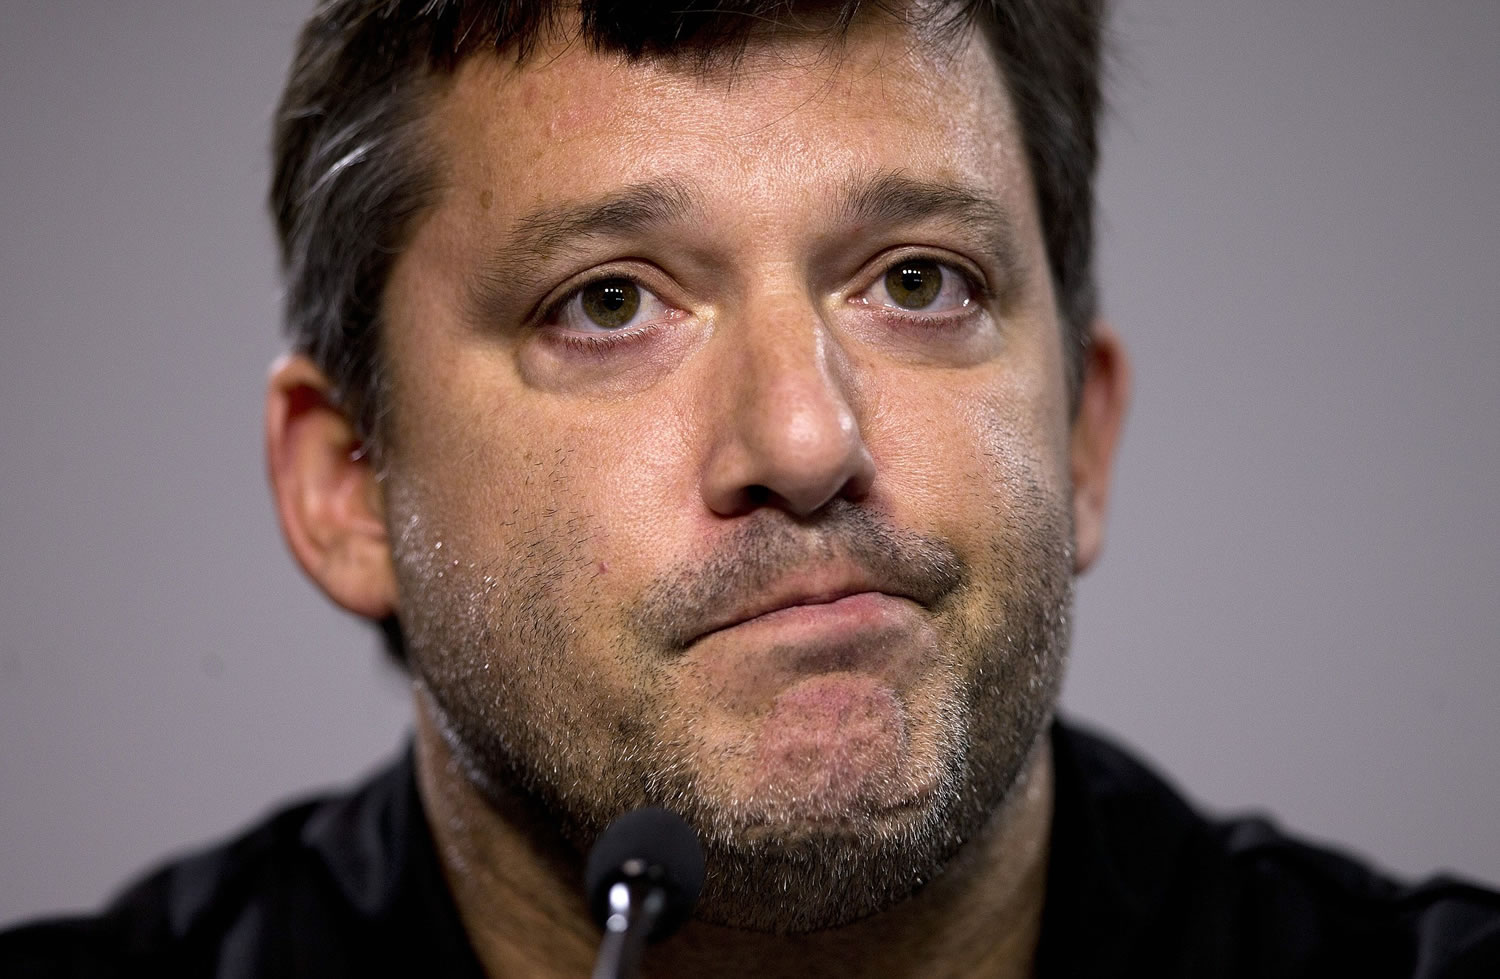 Tony Stewart is scheduled to race Sunday at Watkins Glen International Raceway on the one-year anniversary of when his sprint car struck and killed Kevin Ward Jr.